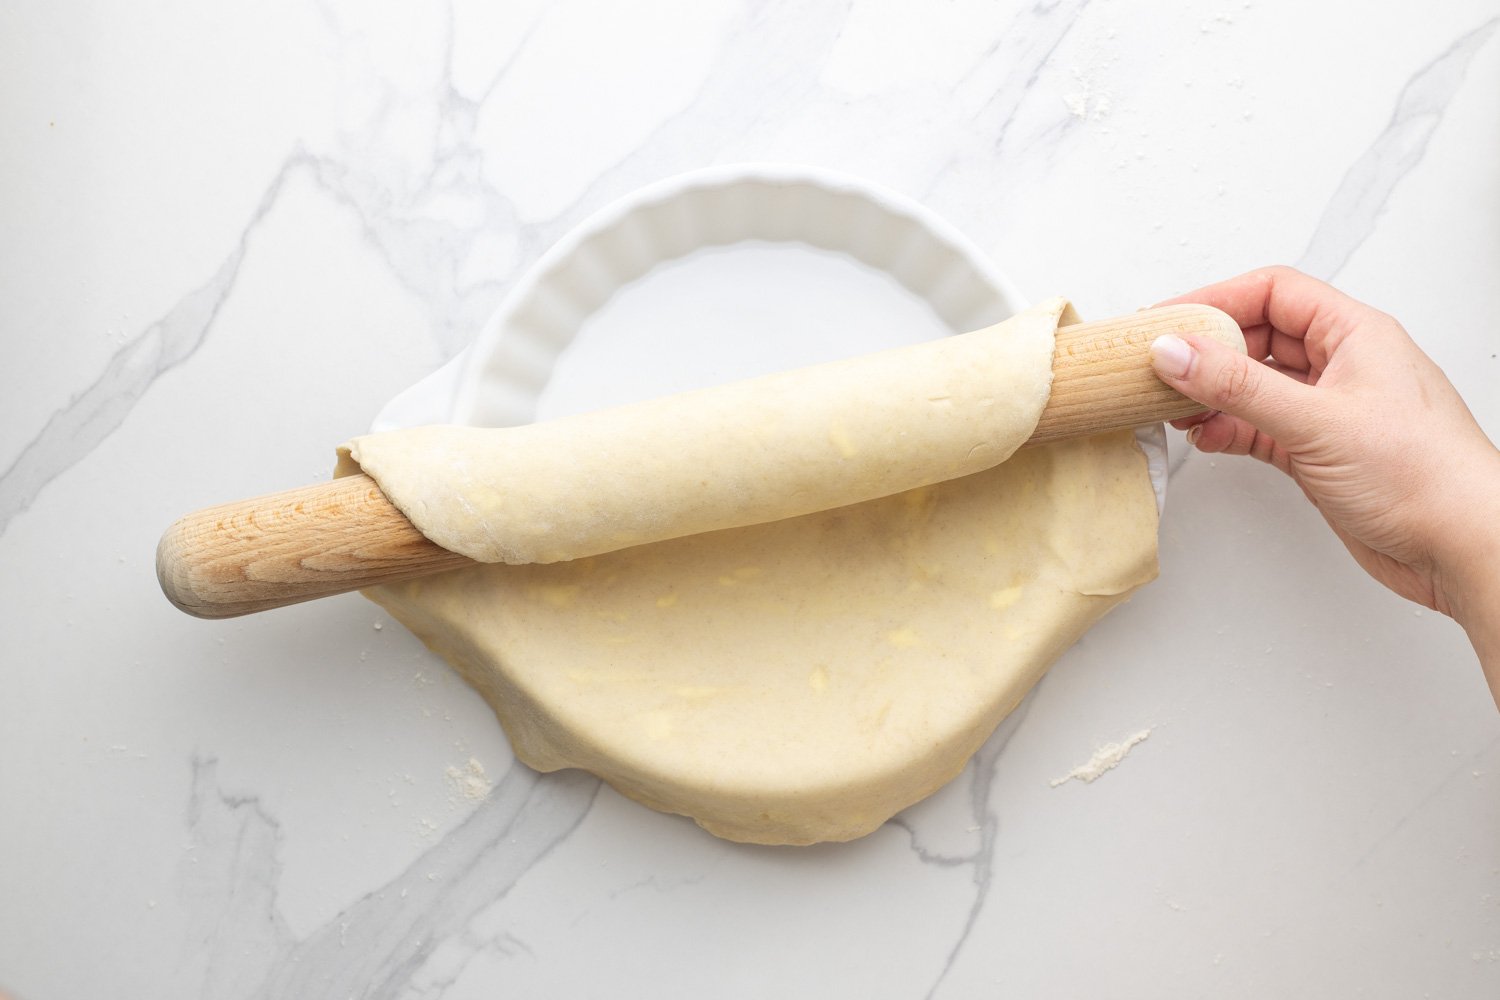 crust dough added to a fluted pie pan with a wooden rolling pin for support.